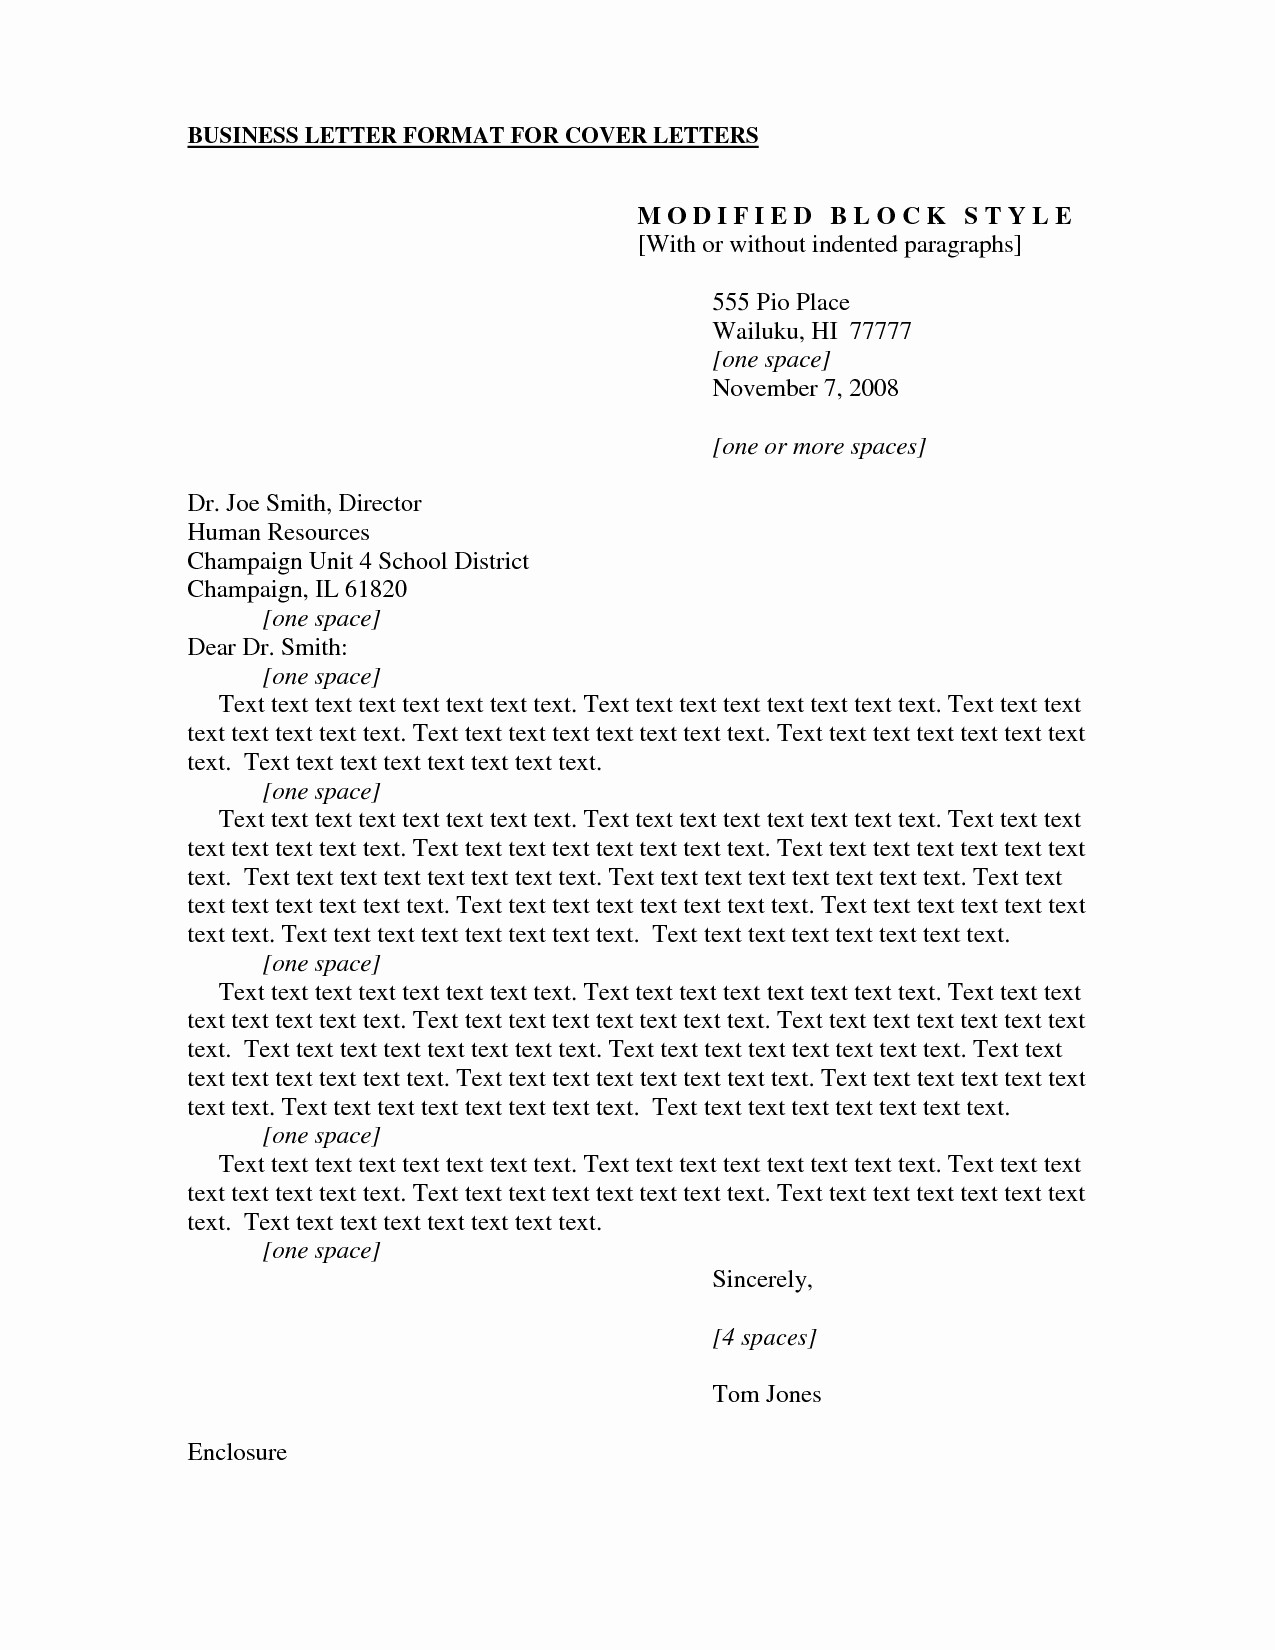 Formal Business Letter format Template New formal Business Cover Letter format